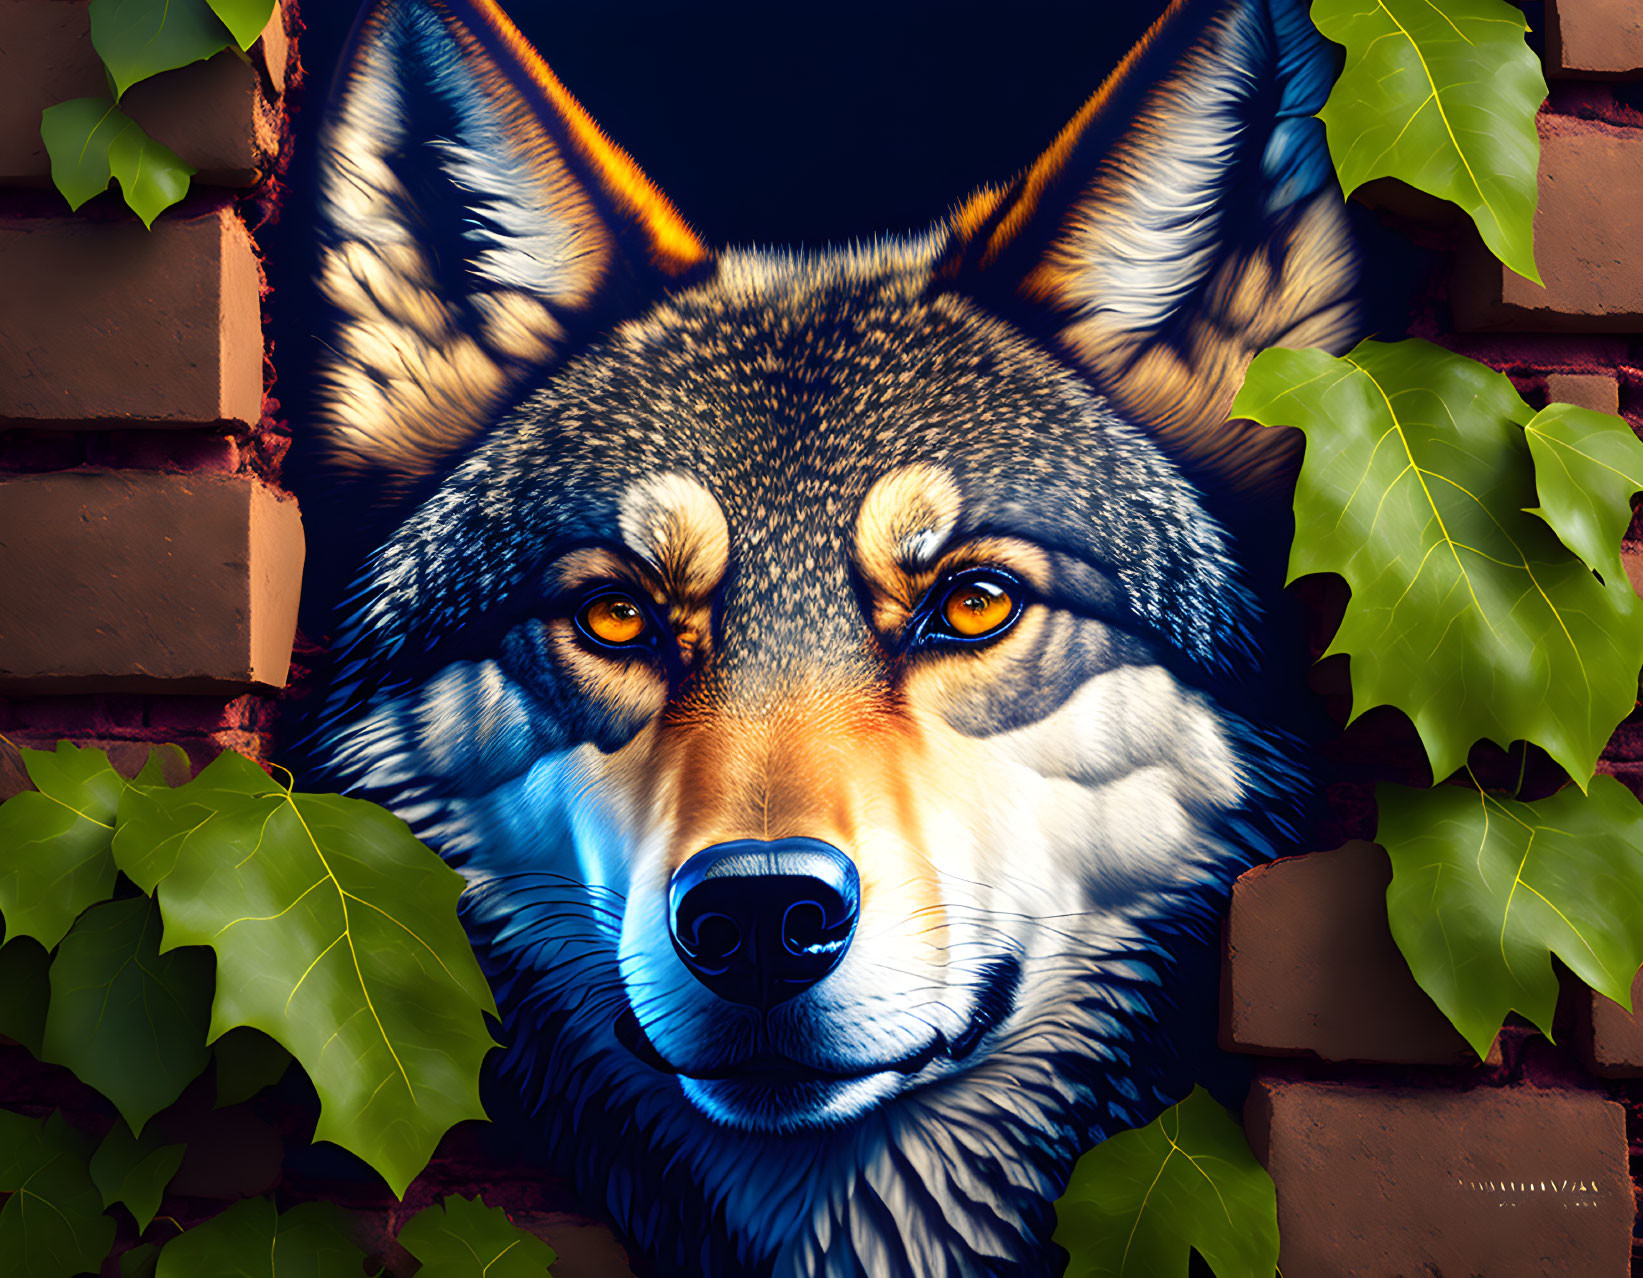 Detailed Wolf Head Illustration Peeking Through Brick Wall with Ivy Leaves